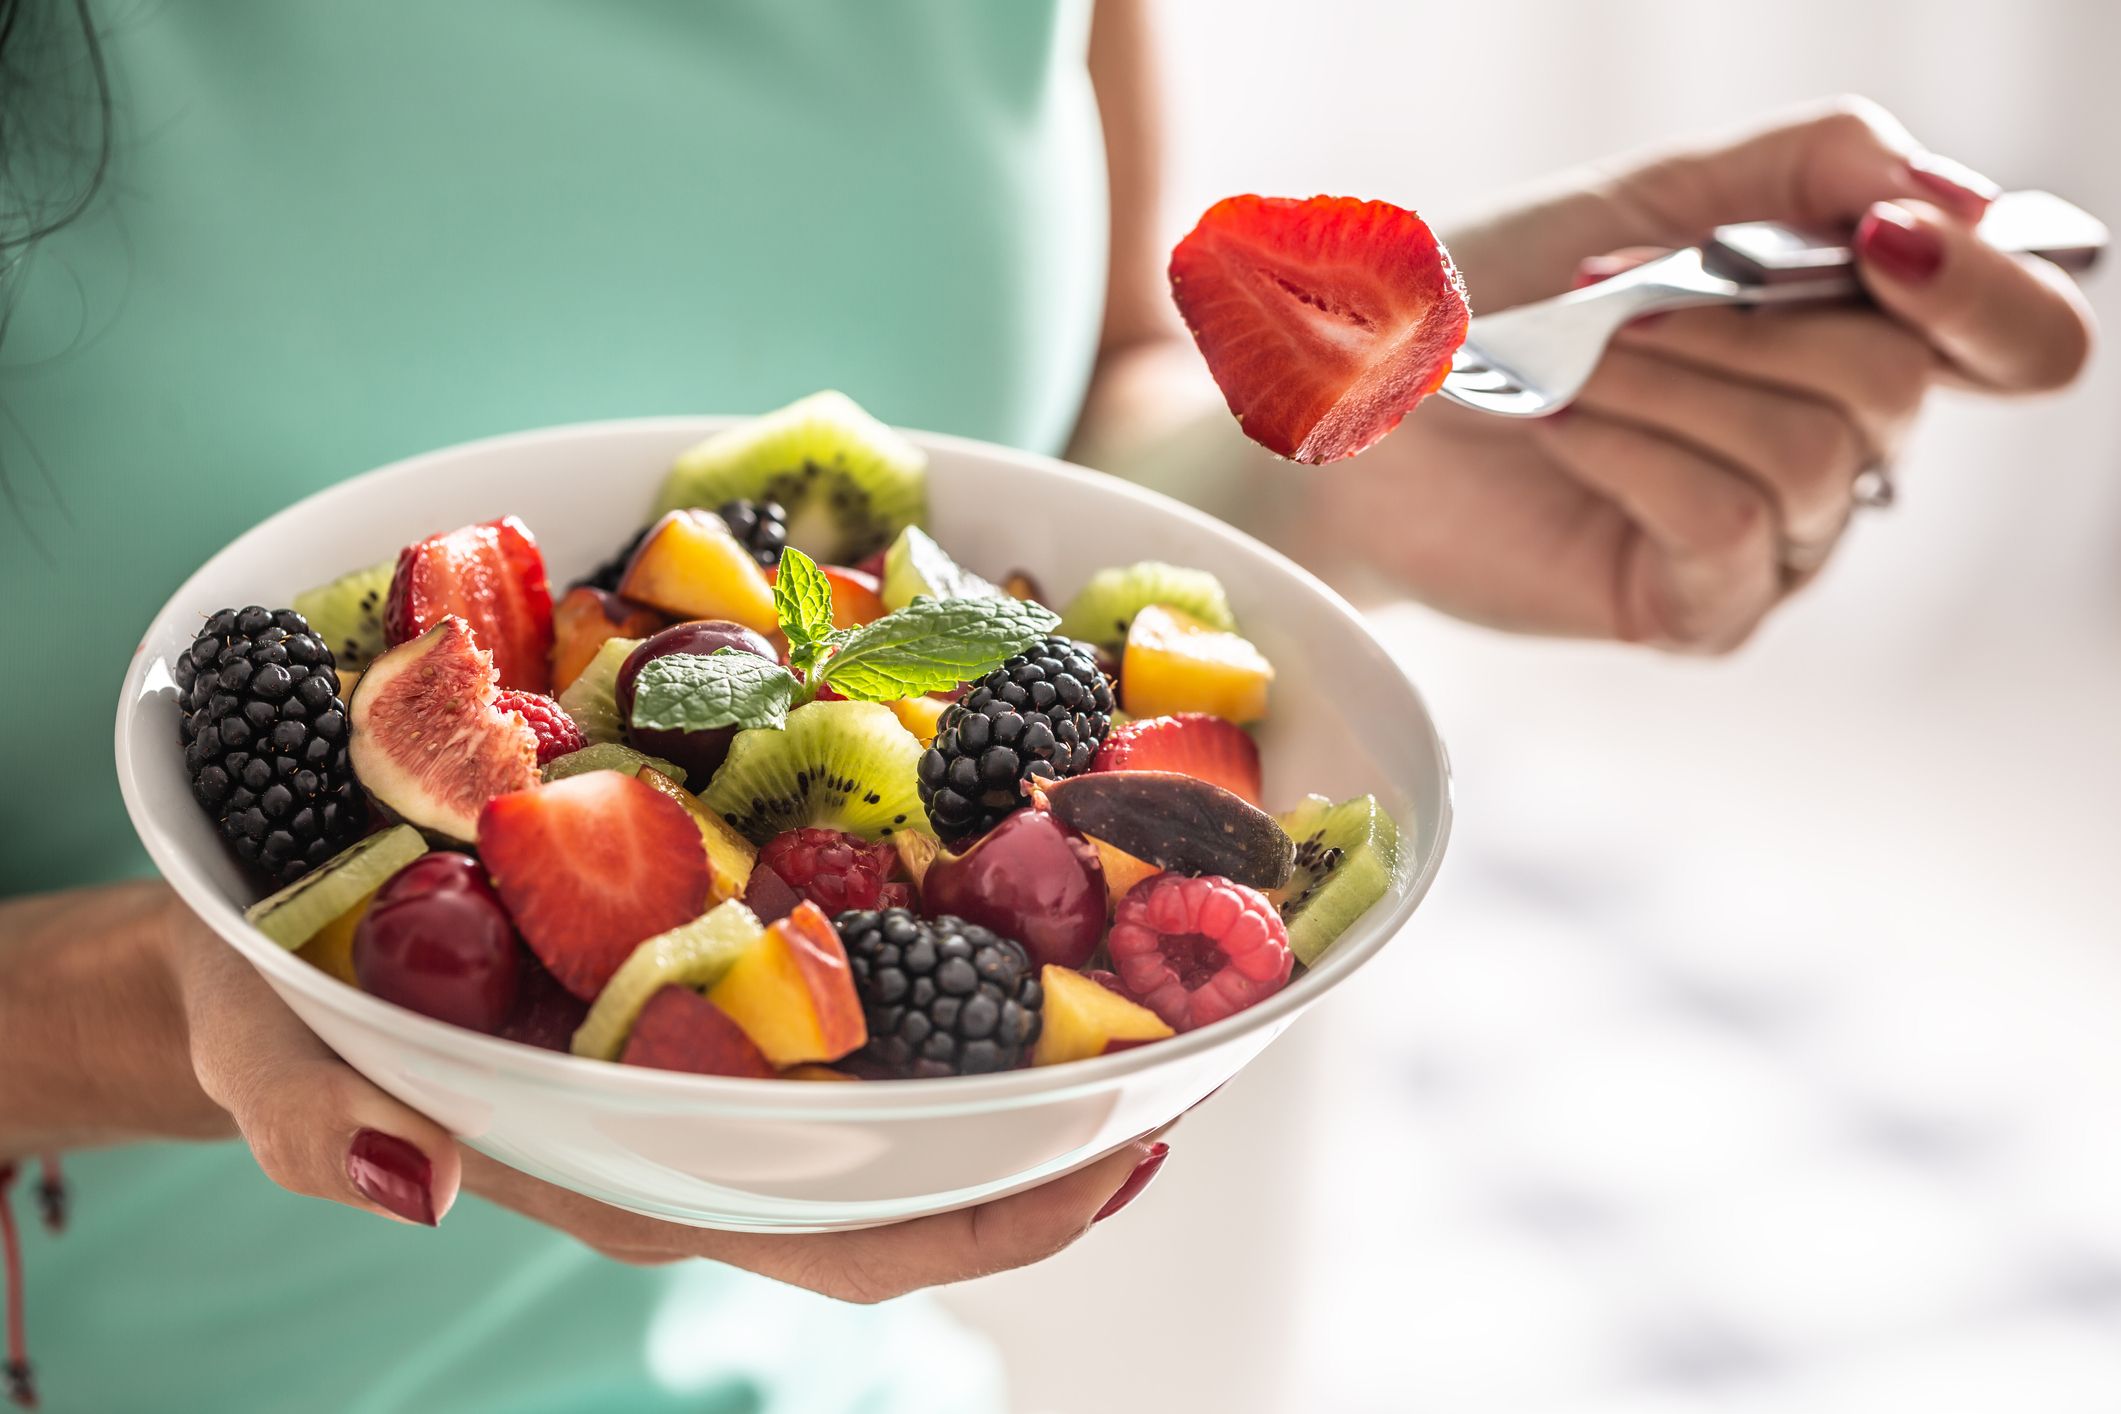 https://hips.hearstapps.com/hmg-prod/images/woman-breakfasts-a-fruit-salad-high-in-vitamins-and-royalty-free-image-1690494564.jpg